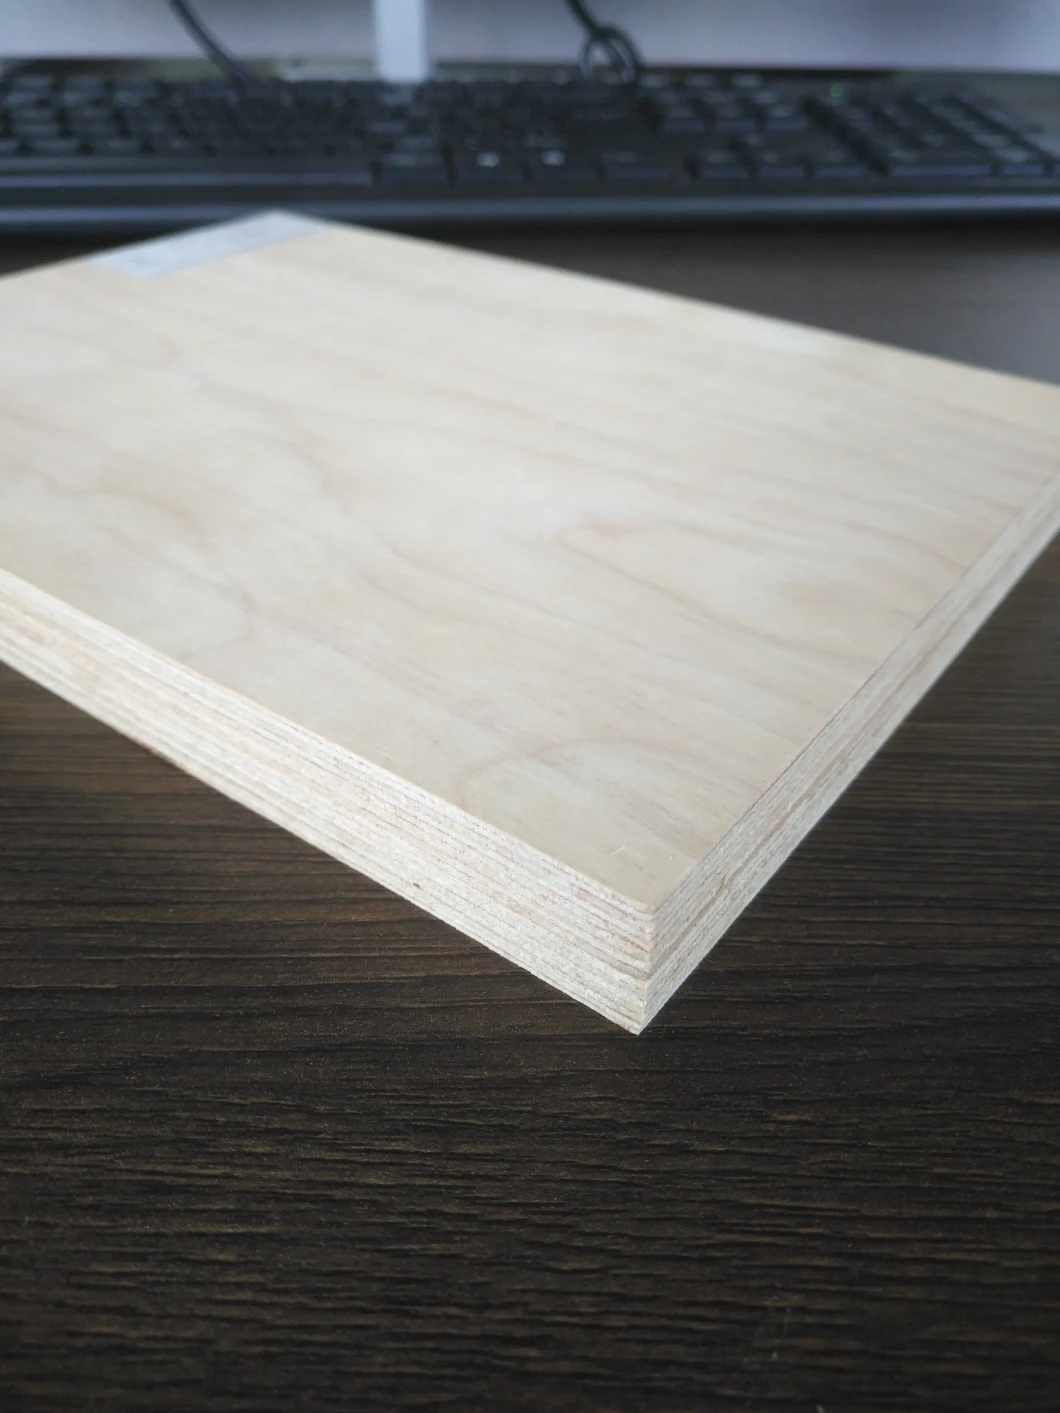 Slotted Grooved Birch Plywood Acoustic Panels